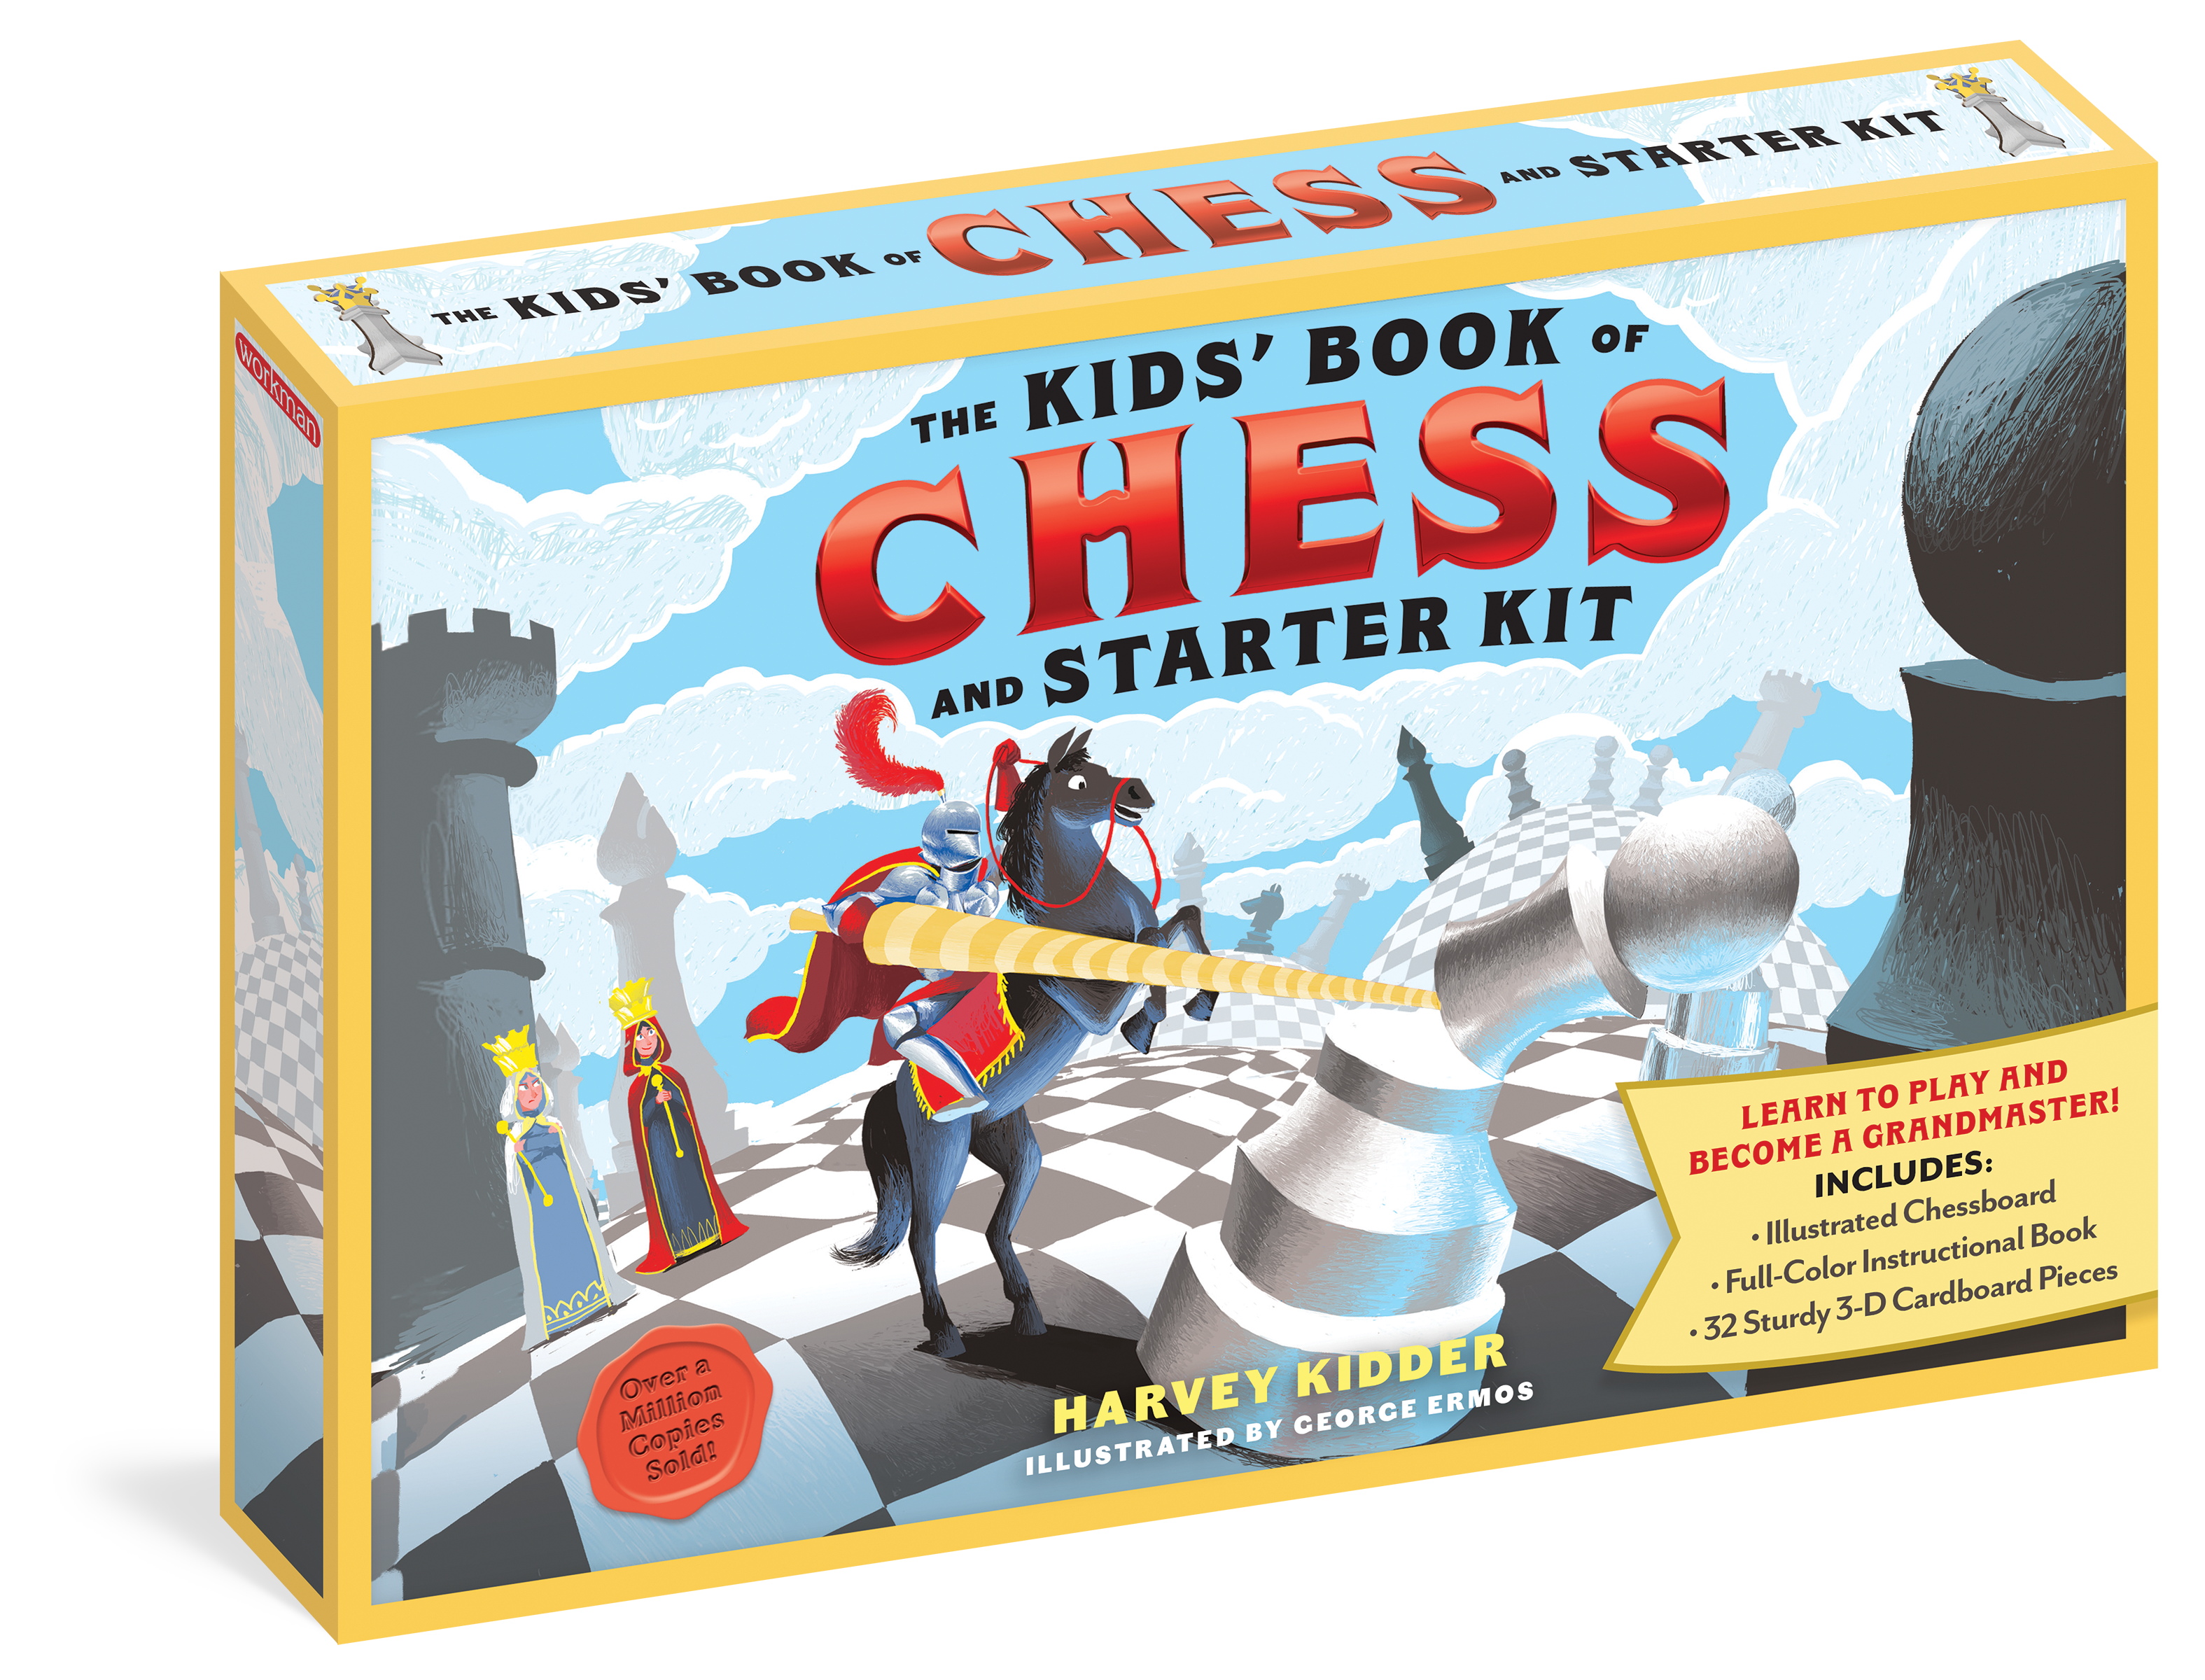 Kid's Book of Chess and Starter Kit